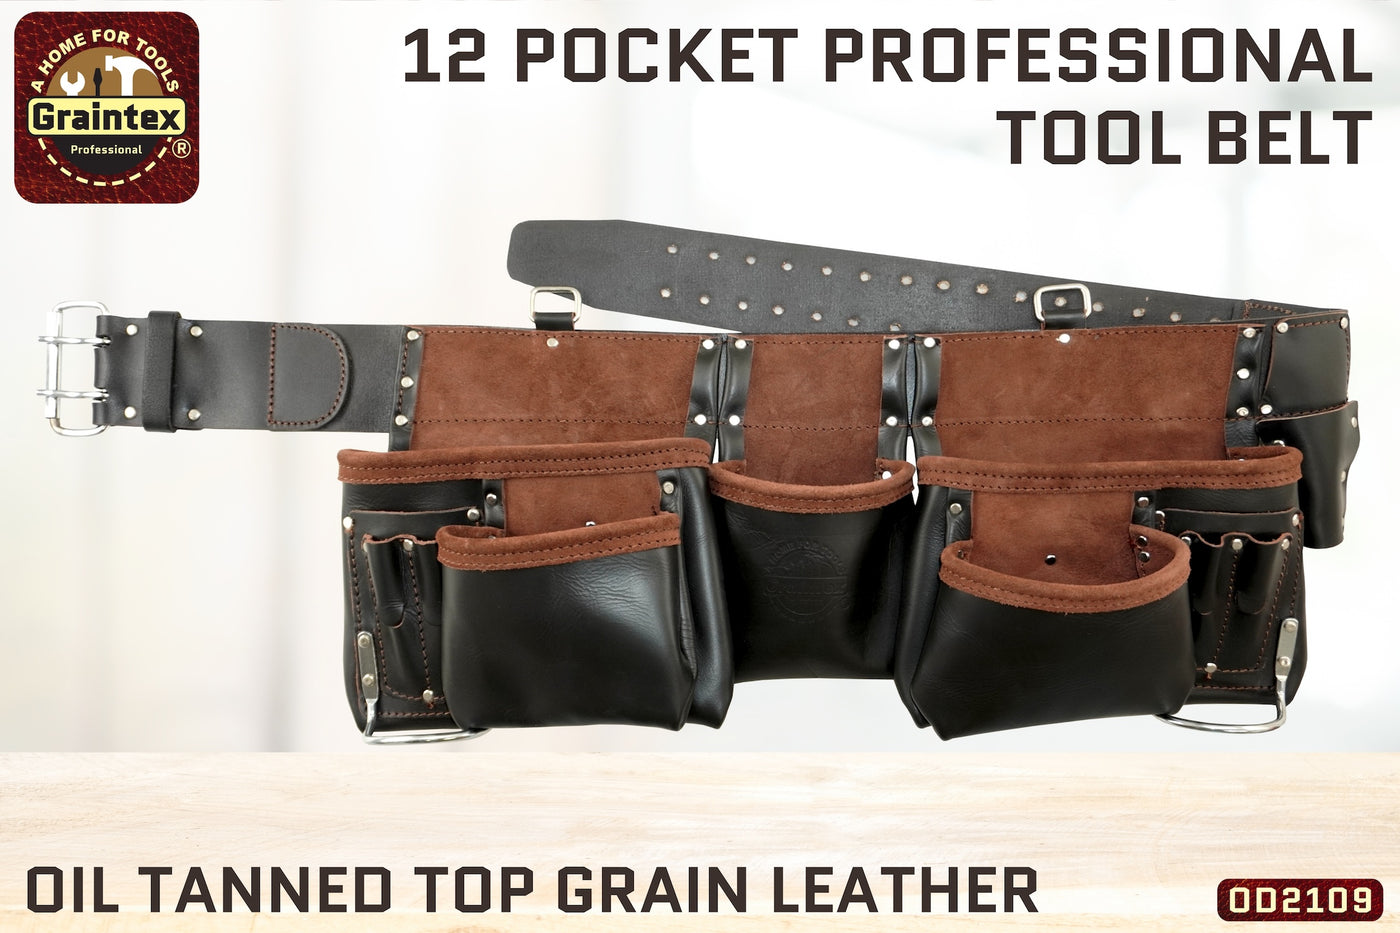 OD2109 :: 12 POCKET PROFESSIONAL TOOL BELT BROWN COLOR OIL TANNED TOP GRAIN LEATHER